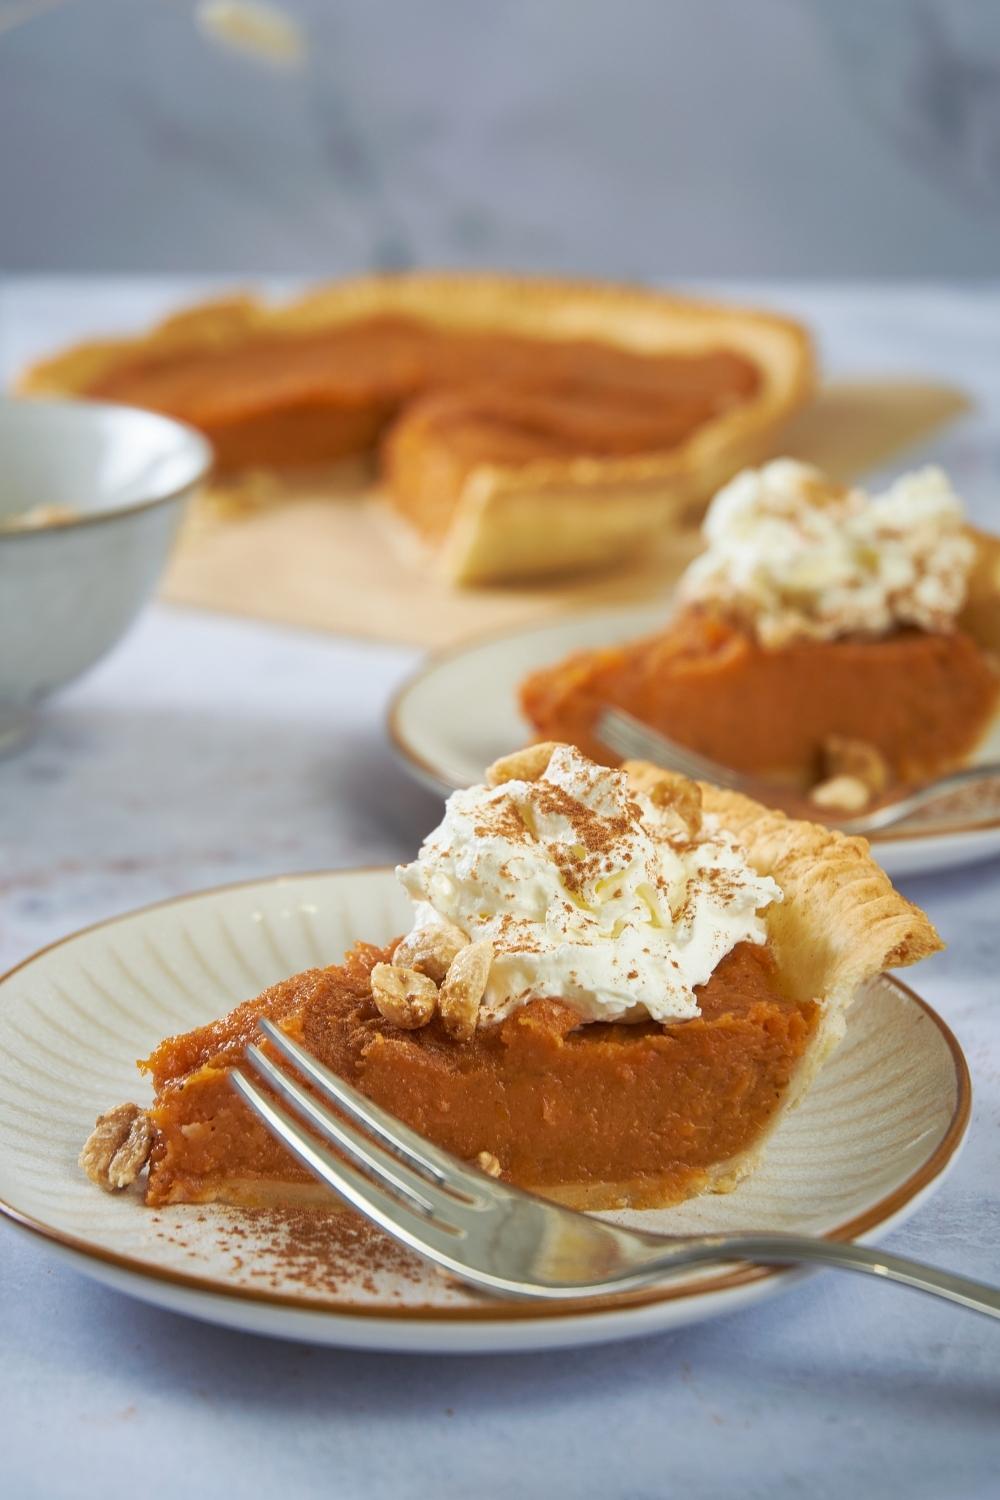 Patti Labelle's sweet potato pie served on a white plate with a fork on the plate, in the background there is the rest of the pie.